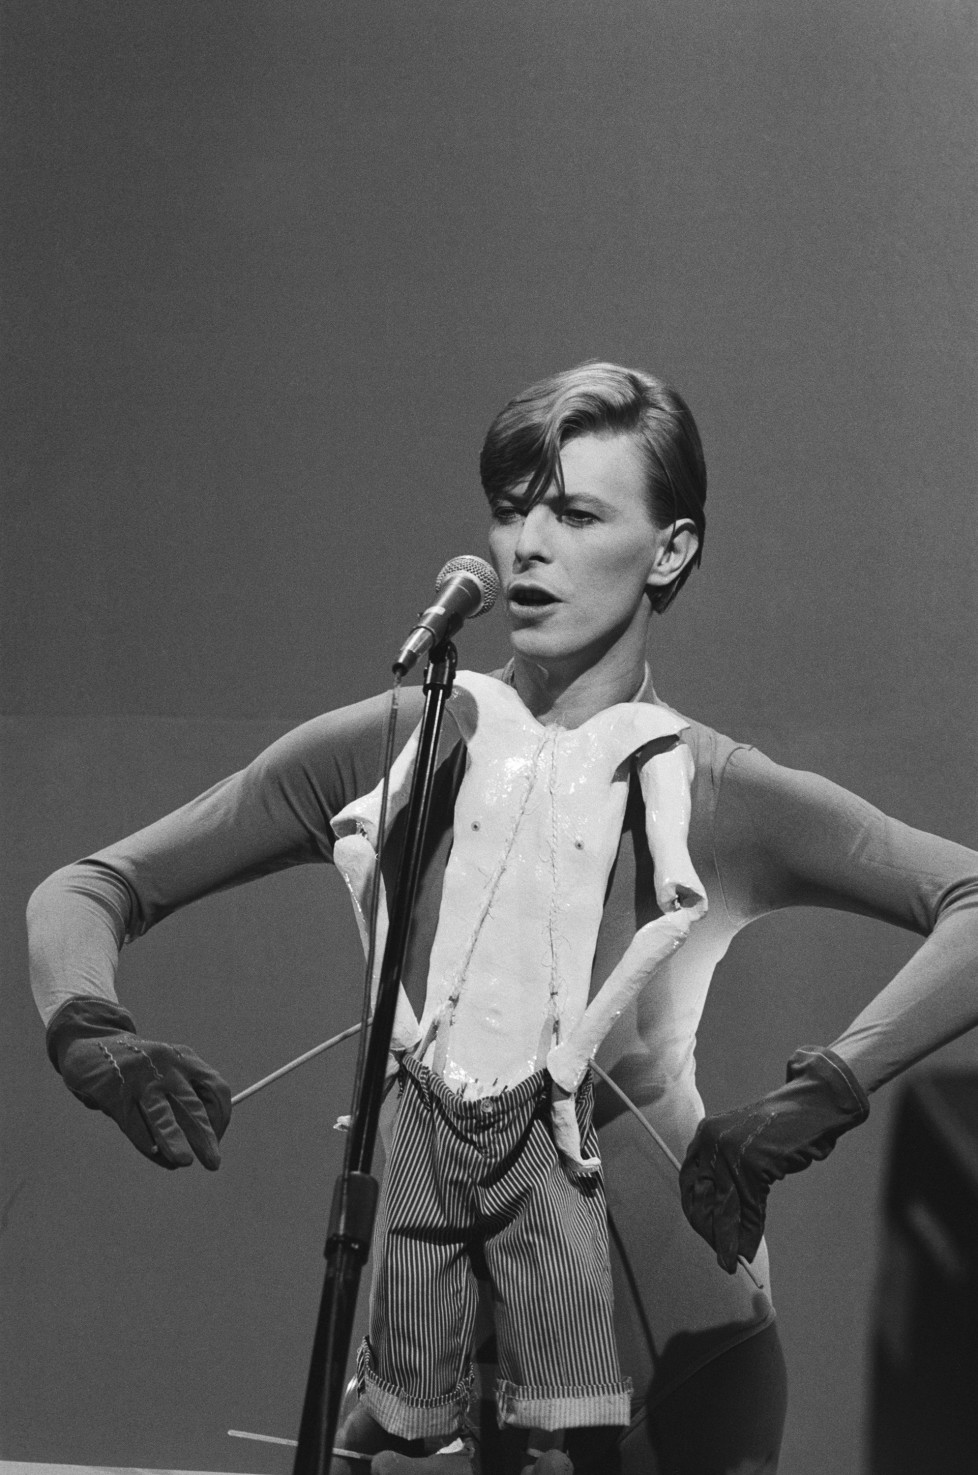 SATURDAY NIGHT LIVE -- Epiosde 7 -- Air Date 12/15/1979 -- Pictured: Musical guest David Bowie performs on December 15, 1979 -- Photo by: Alan Singer/NBCU Photo Bank